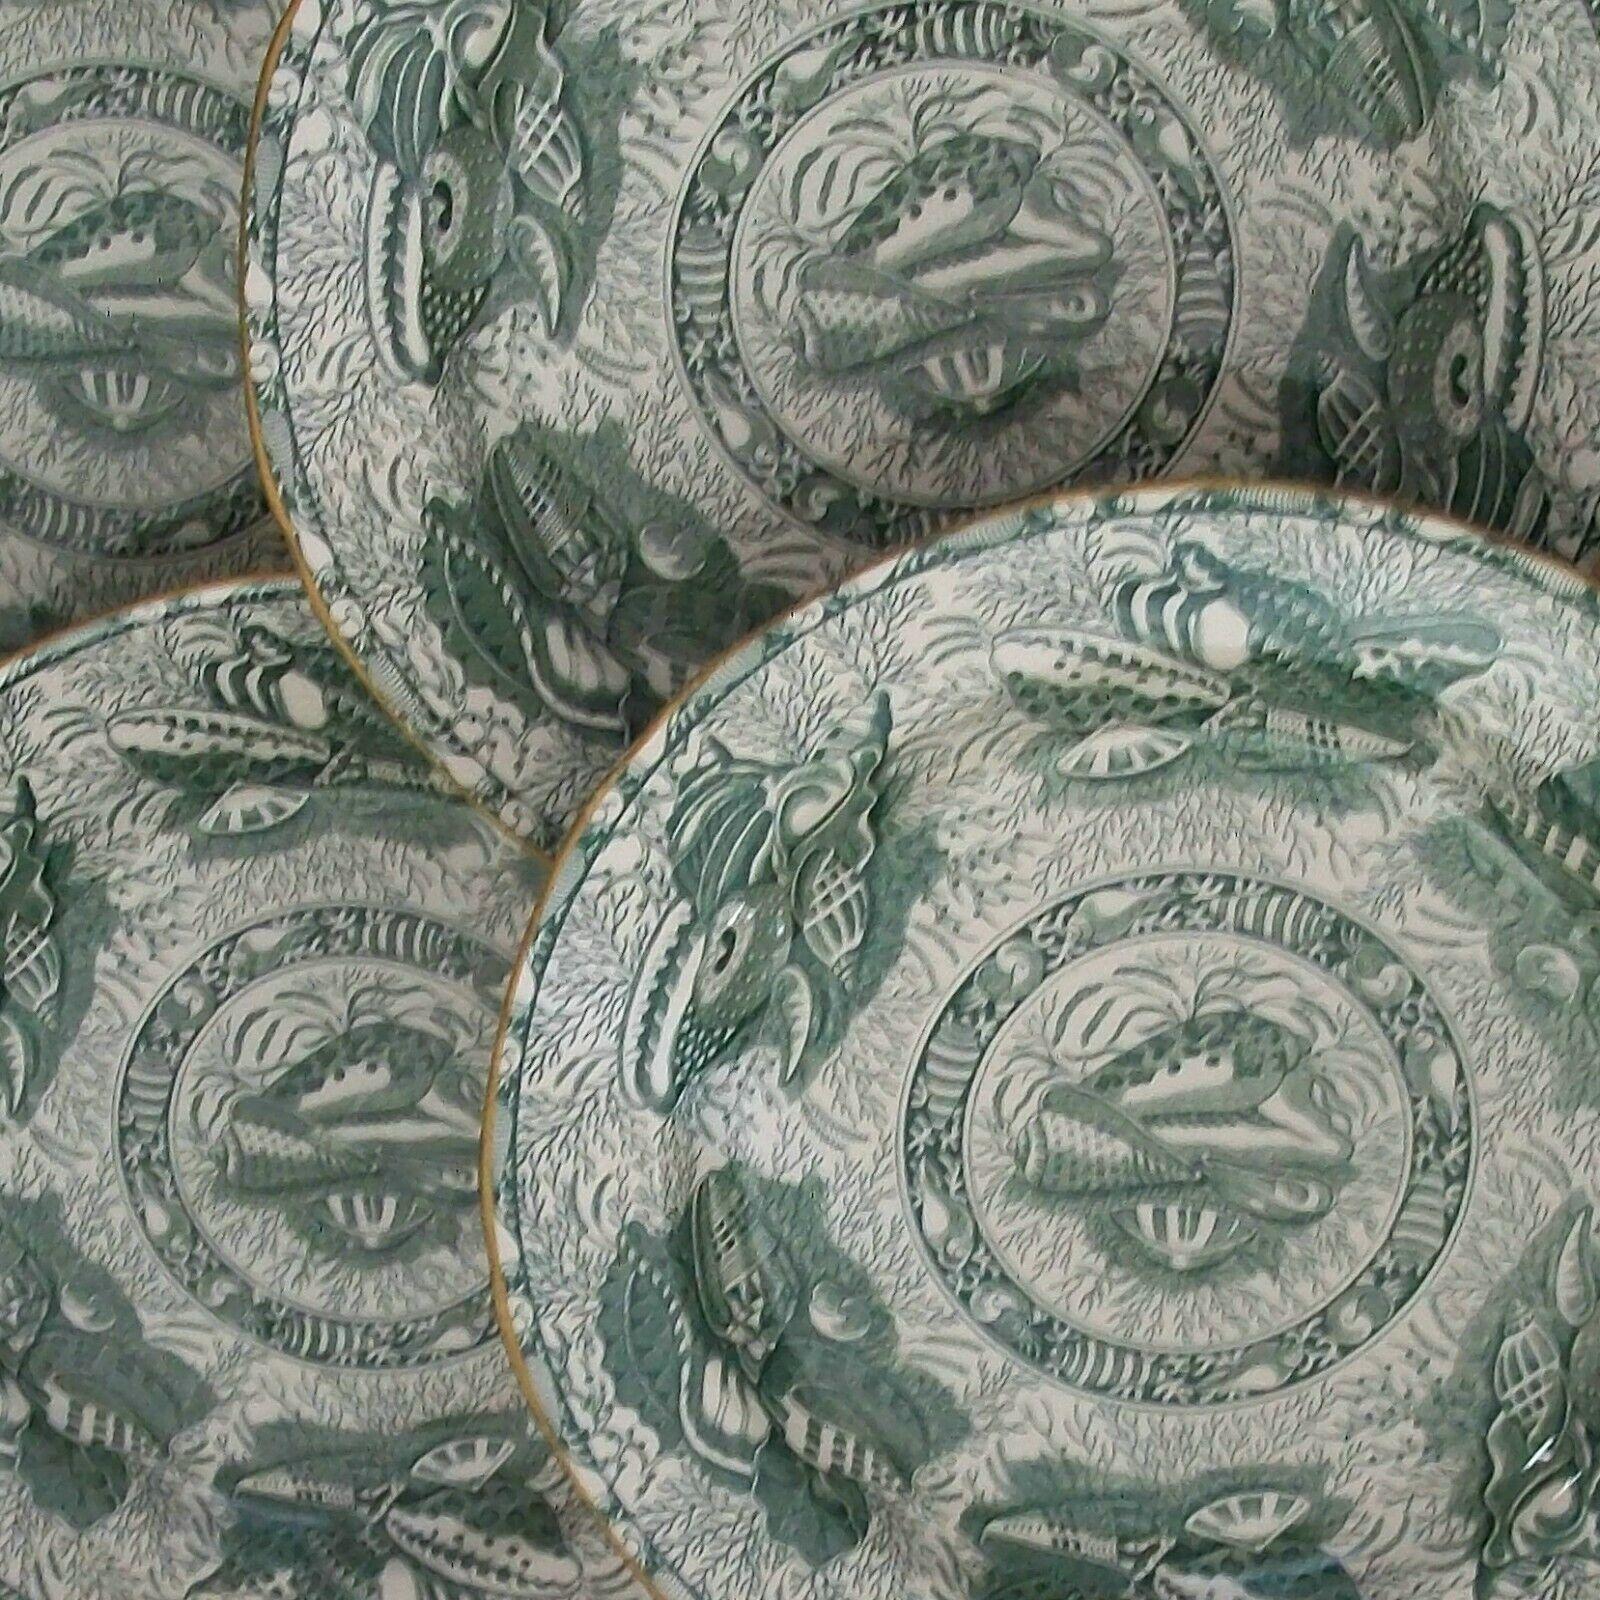 MOTTAHEDEH - 'Torquay' - Winterthur Museum Reproduction - Set of four green transfer decorated dinner plates - each plate featuring a variety of shells - after an early Staffordshire design, circa 1820 - simple gold border / edge - signed on the